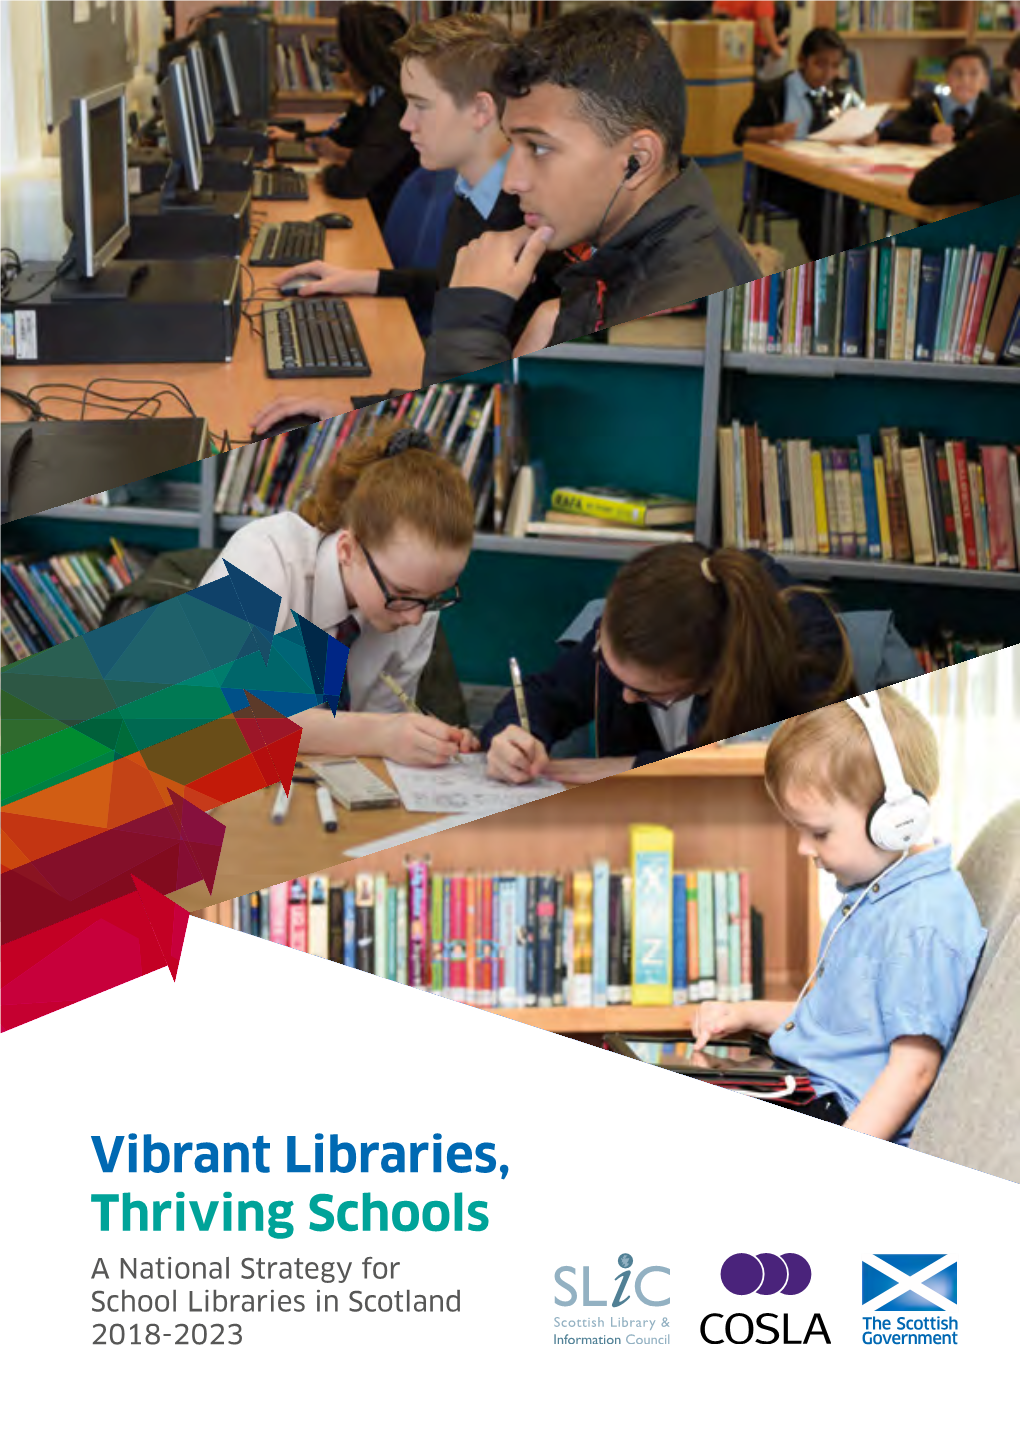 Vibrant Libraries, Thriving Schools a National Strategy for School Libraries in Scotland 2018-2023 My School Library Helps Me at All Levels of My Education